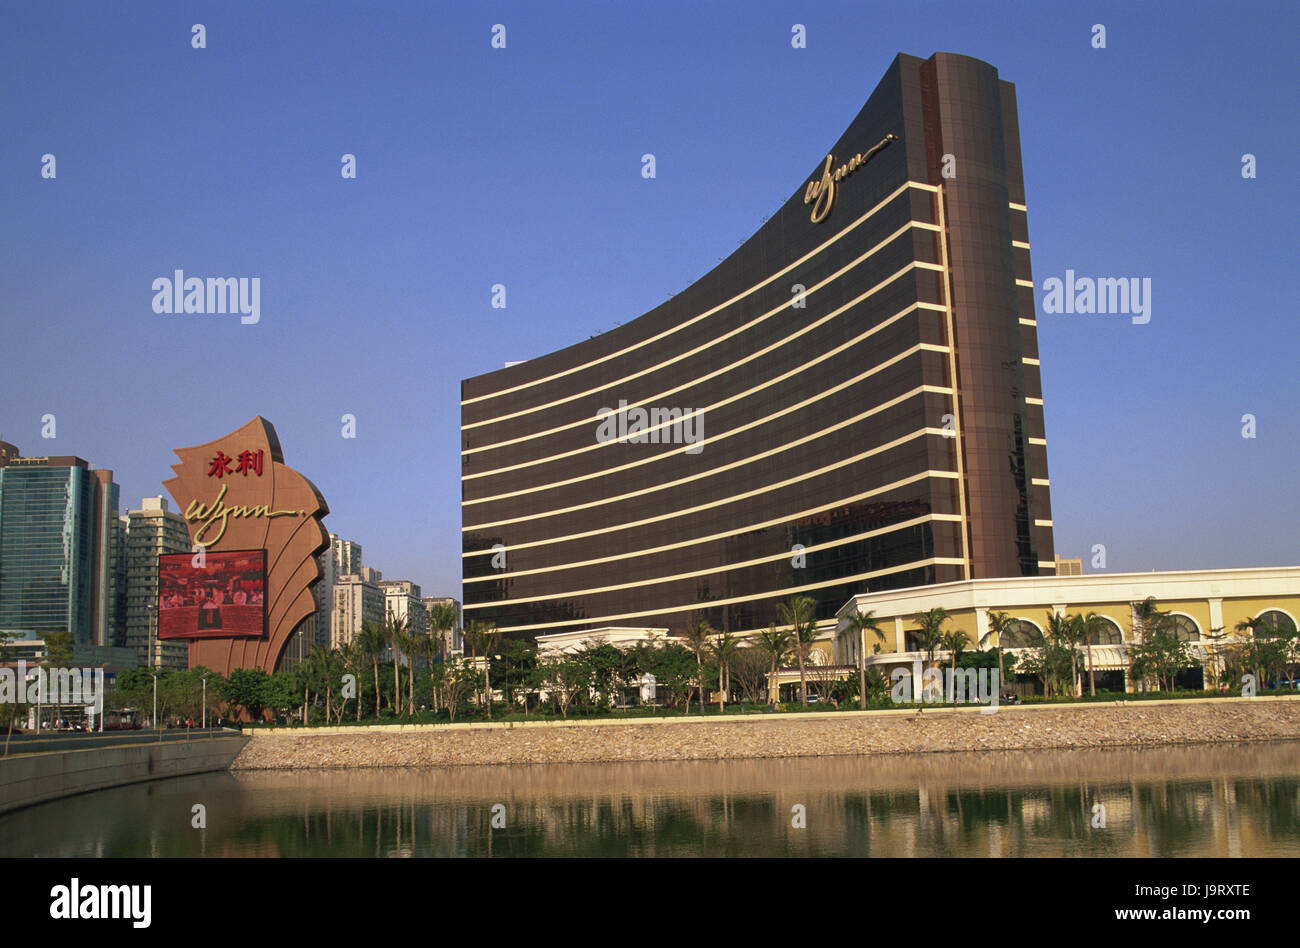 China,Macau,Wynn hotel and casino,Asia,Eastern Asia,peninsula,town,building,architecture,hotel building,modern,tourism,palms,water,water cymbals,heavens,cloudless, Stock Photo